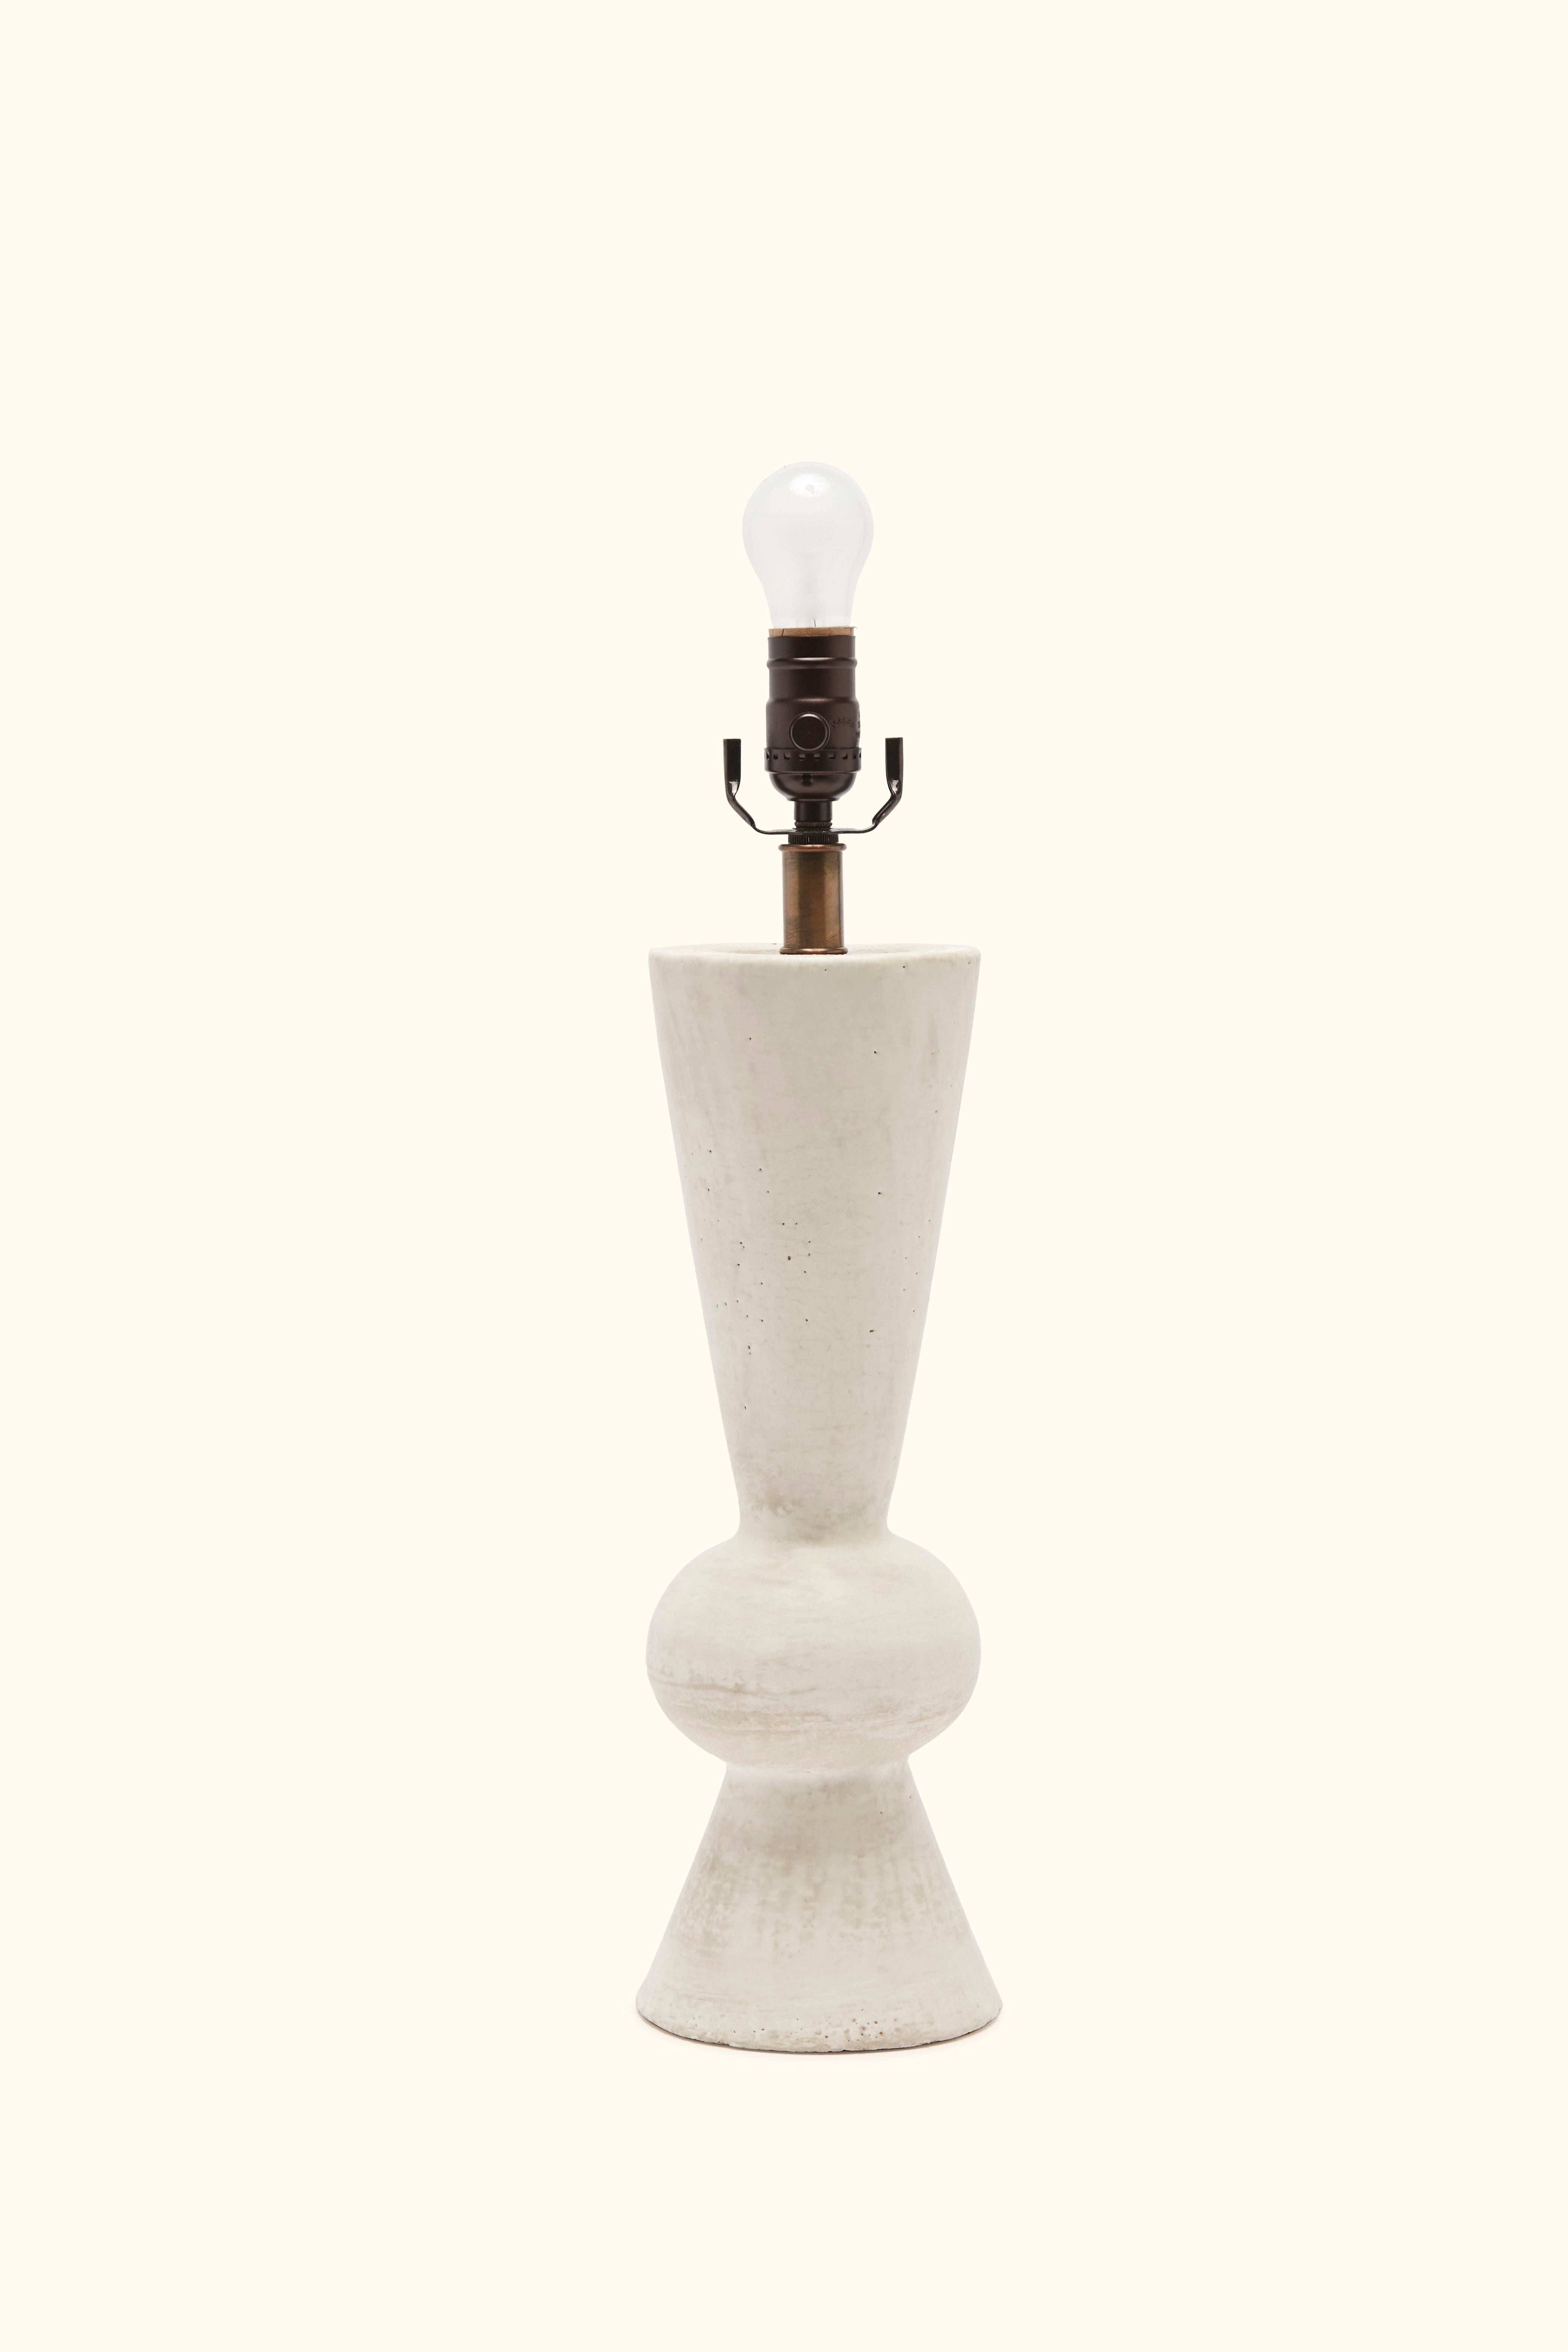 The Octavious lamp in bone glaze is handmade studio pottery by ceramic artist by Danny Kaplan. Linen shade included.

Born in New York City and raised in Aix-en-Provence, France, Danny Kaplan’s passion for ceramics was shaped by early exposure to